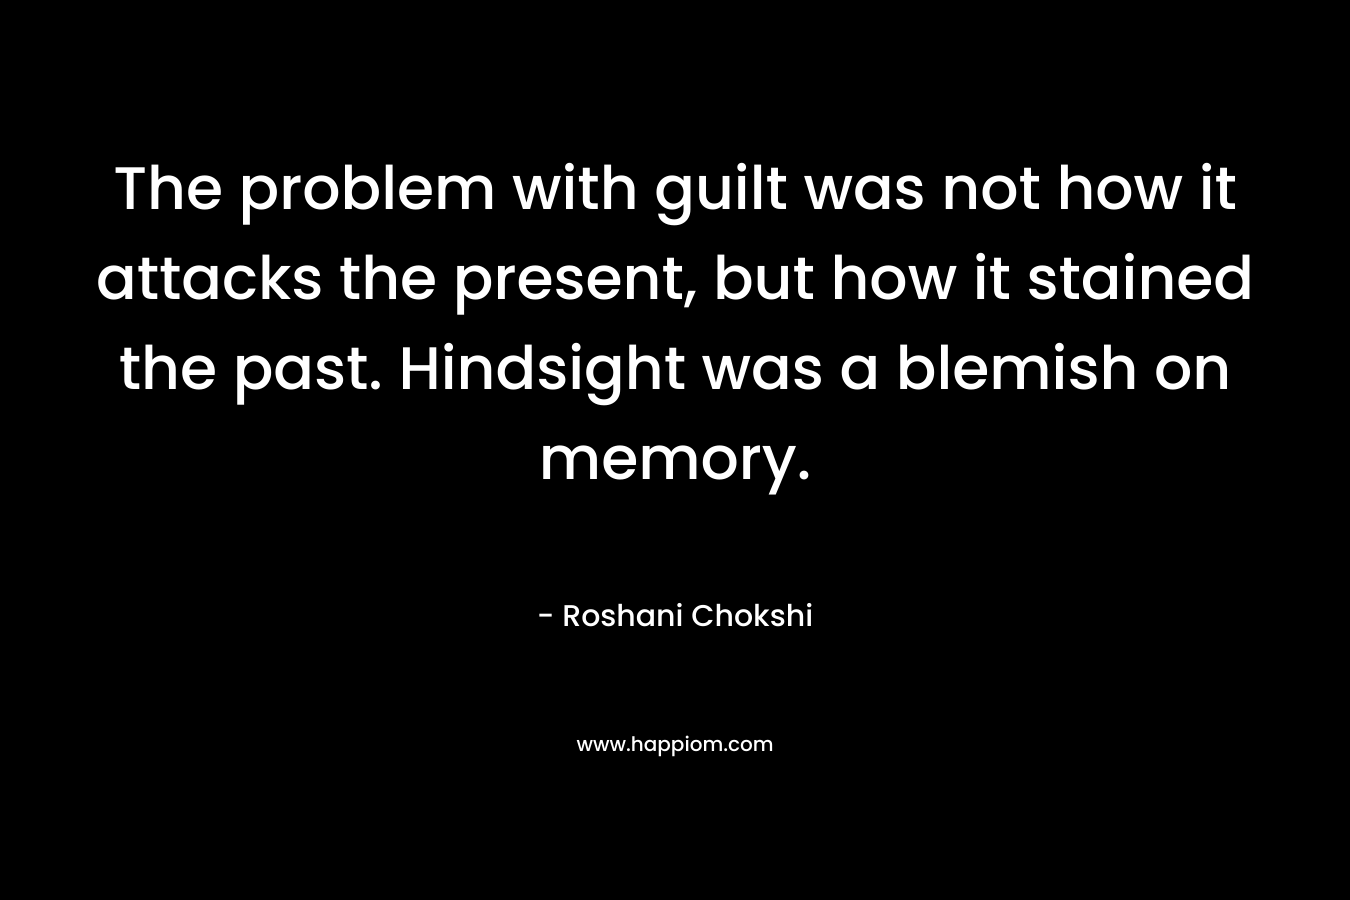 The problem with guilt was not how it attacks the present, but how it stained the past. Hindsight was a blemish on memory. – Roshani Chokshi